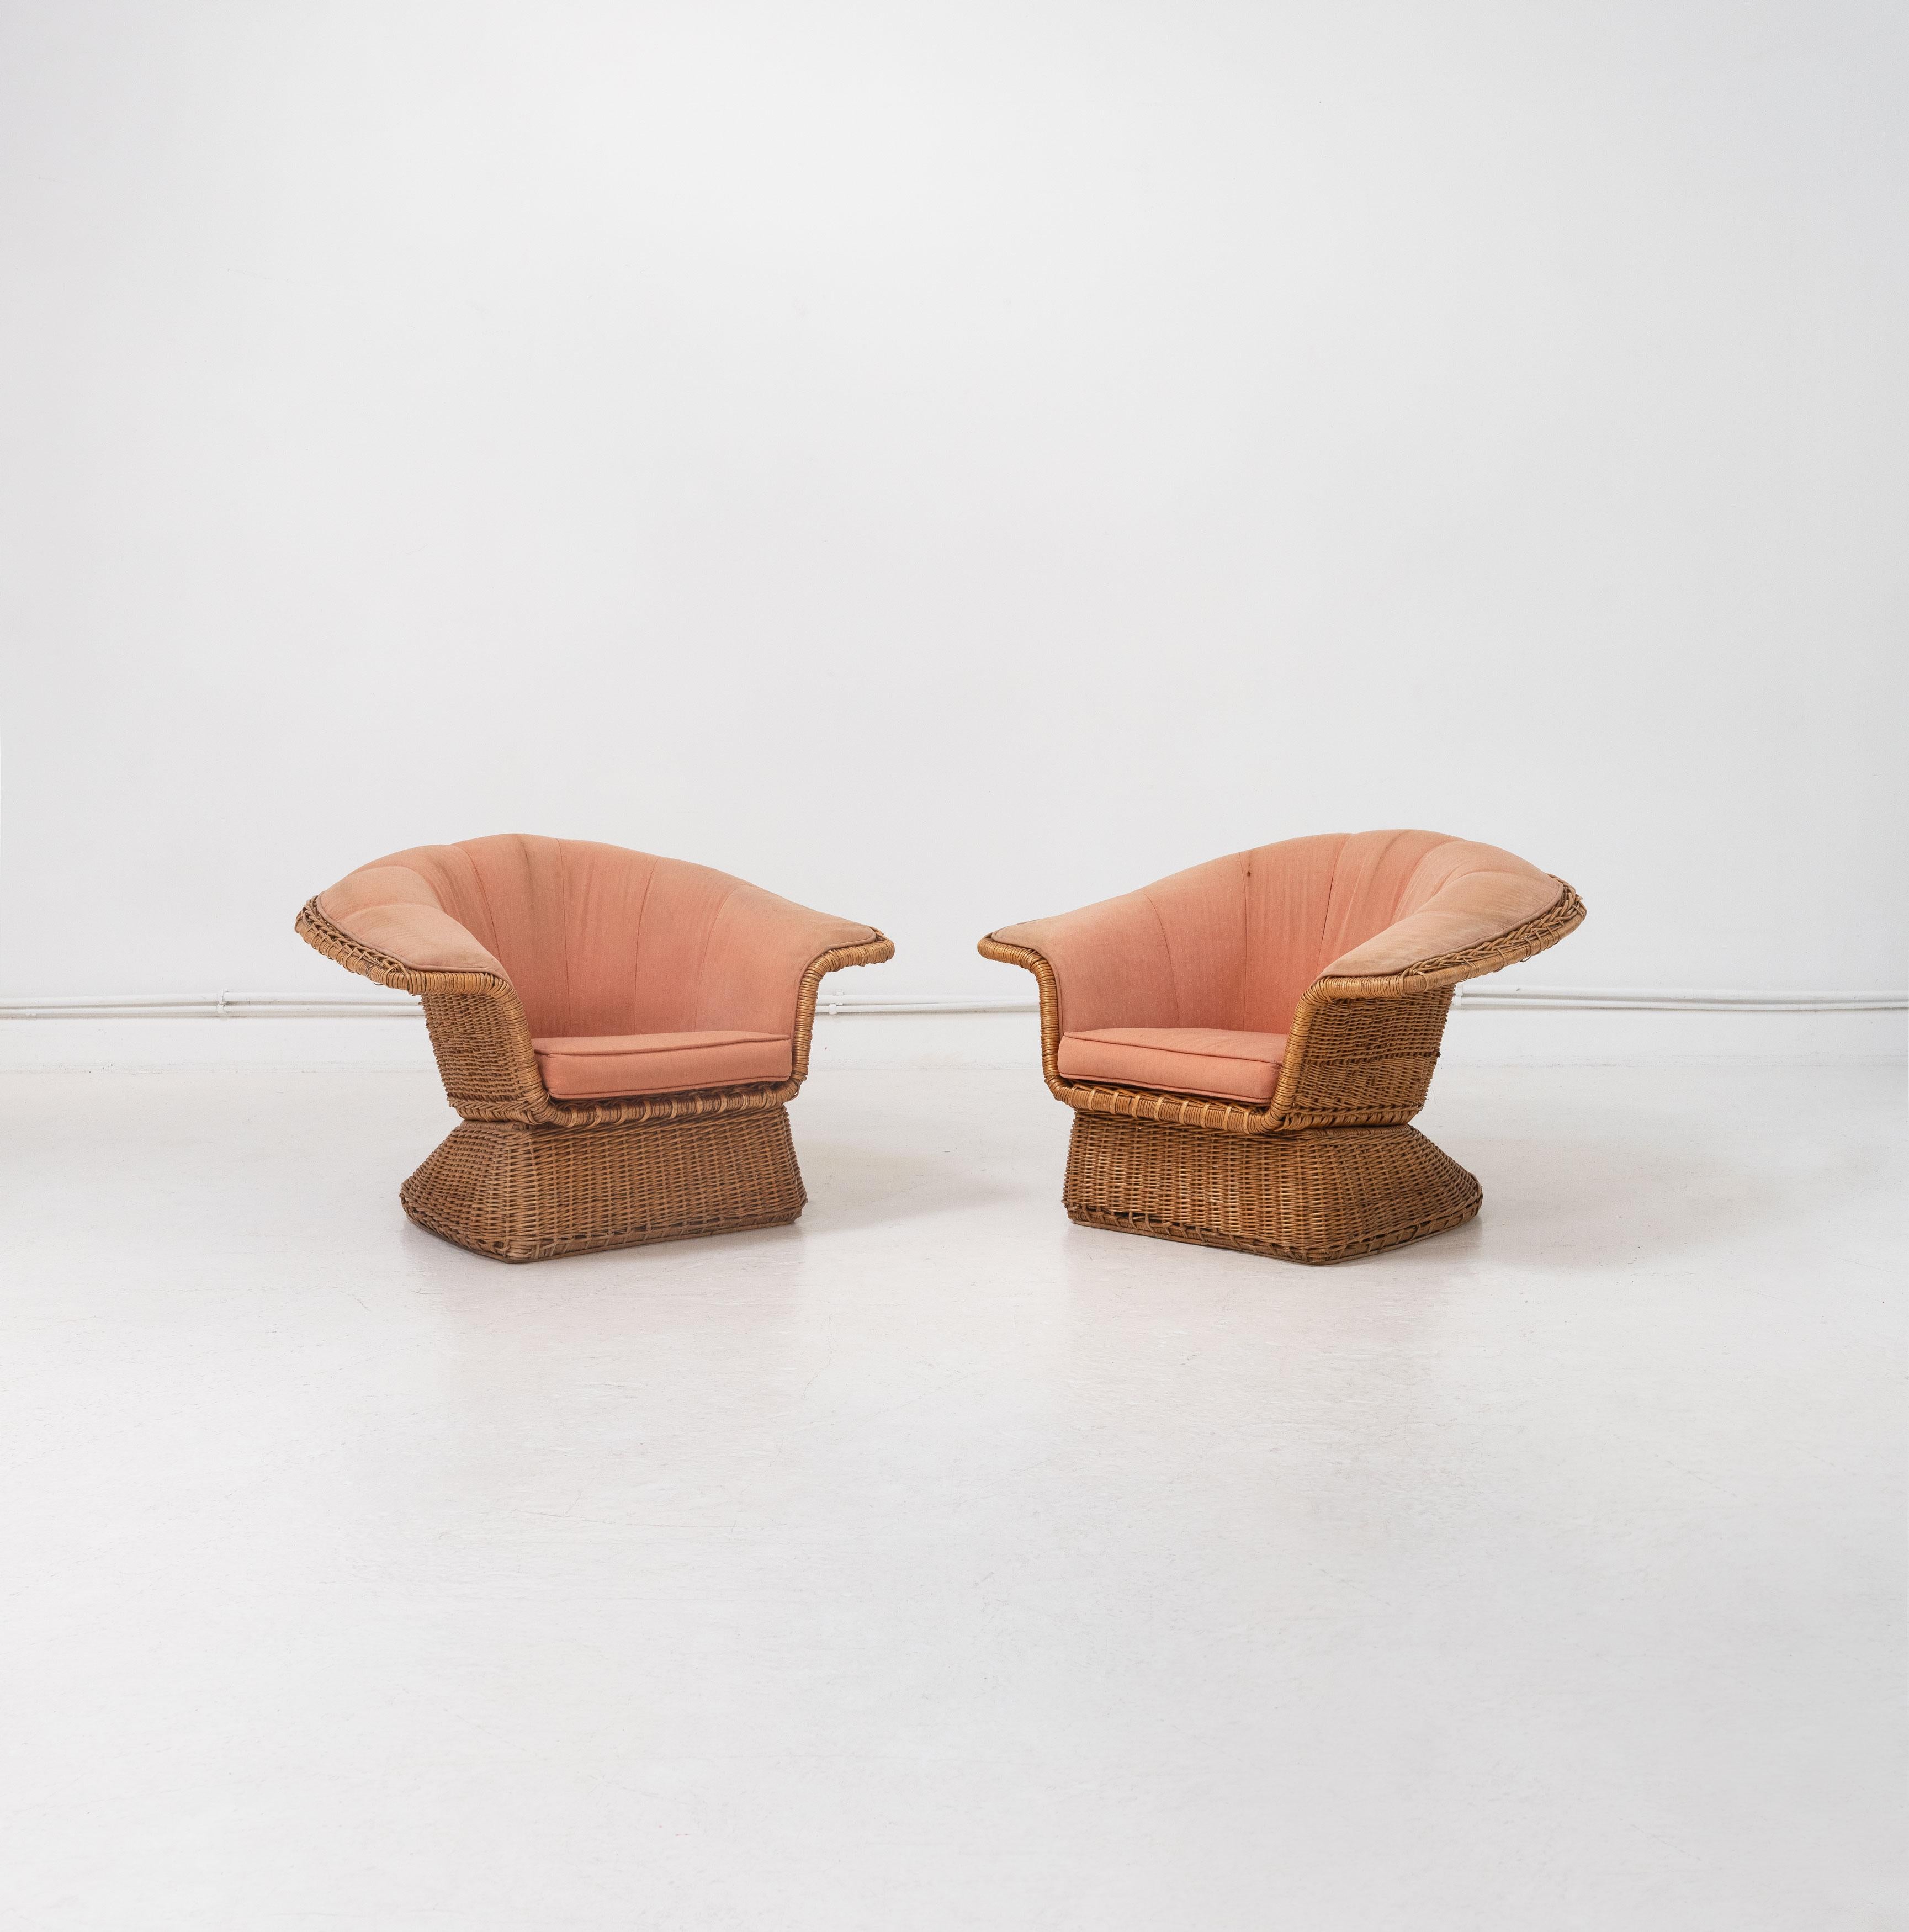 A pair of mid 20th Century wicker armchairs designed by Lyda Levi and produced by McGuire Company, San Francisco. Composed from rattan woven around a tubular metal frame and upholstered in a peach coloured fabric. 